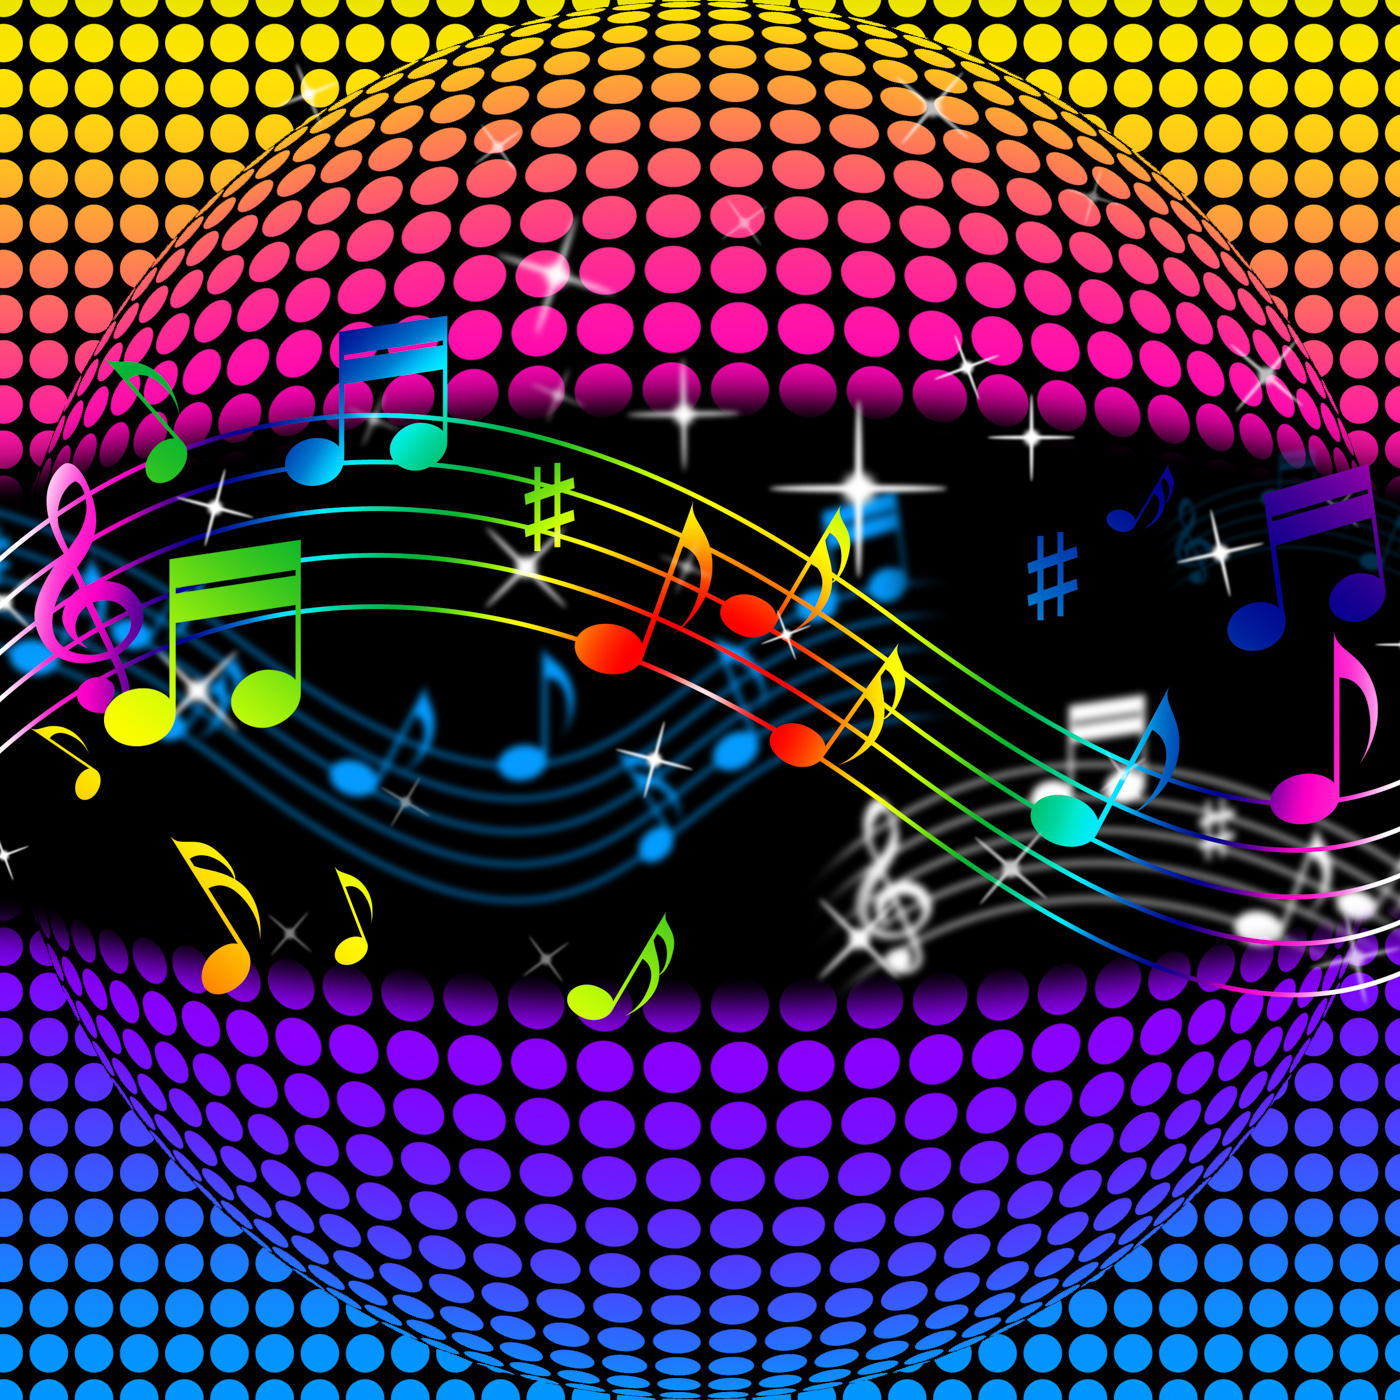 Music disco ball background shows colorful musical and clubbing photo